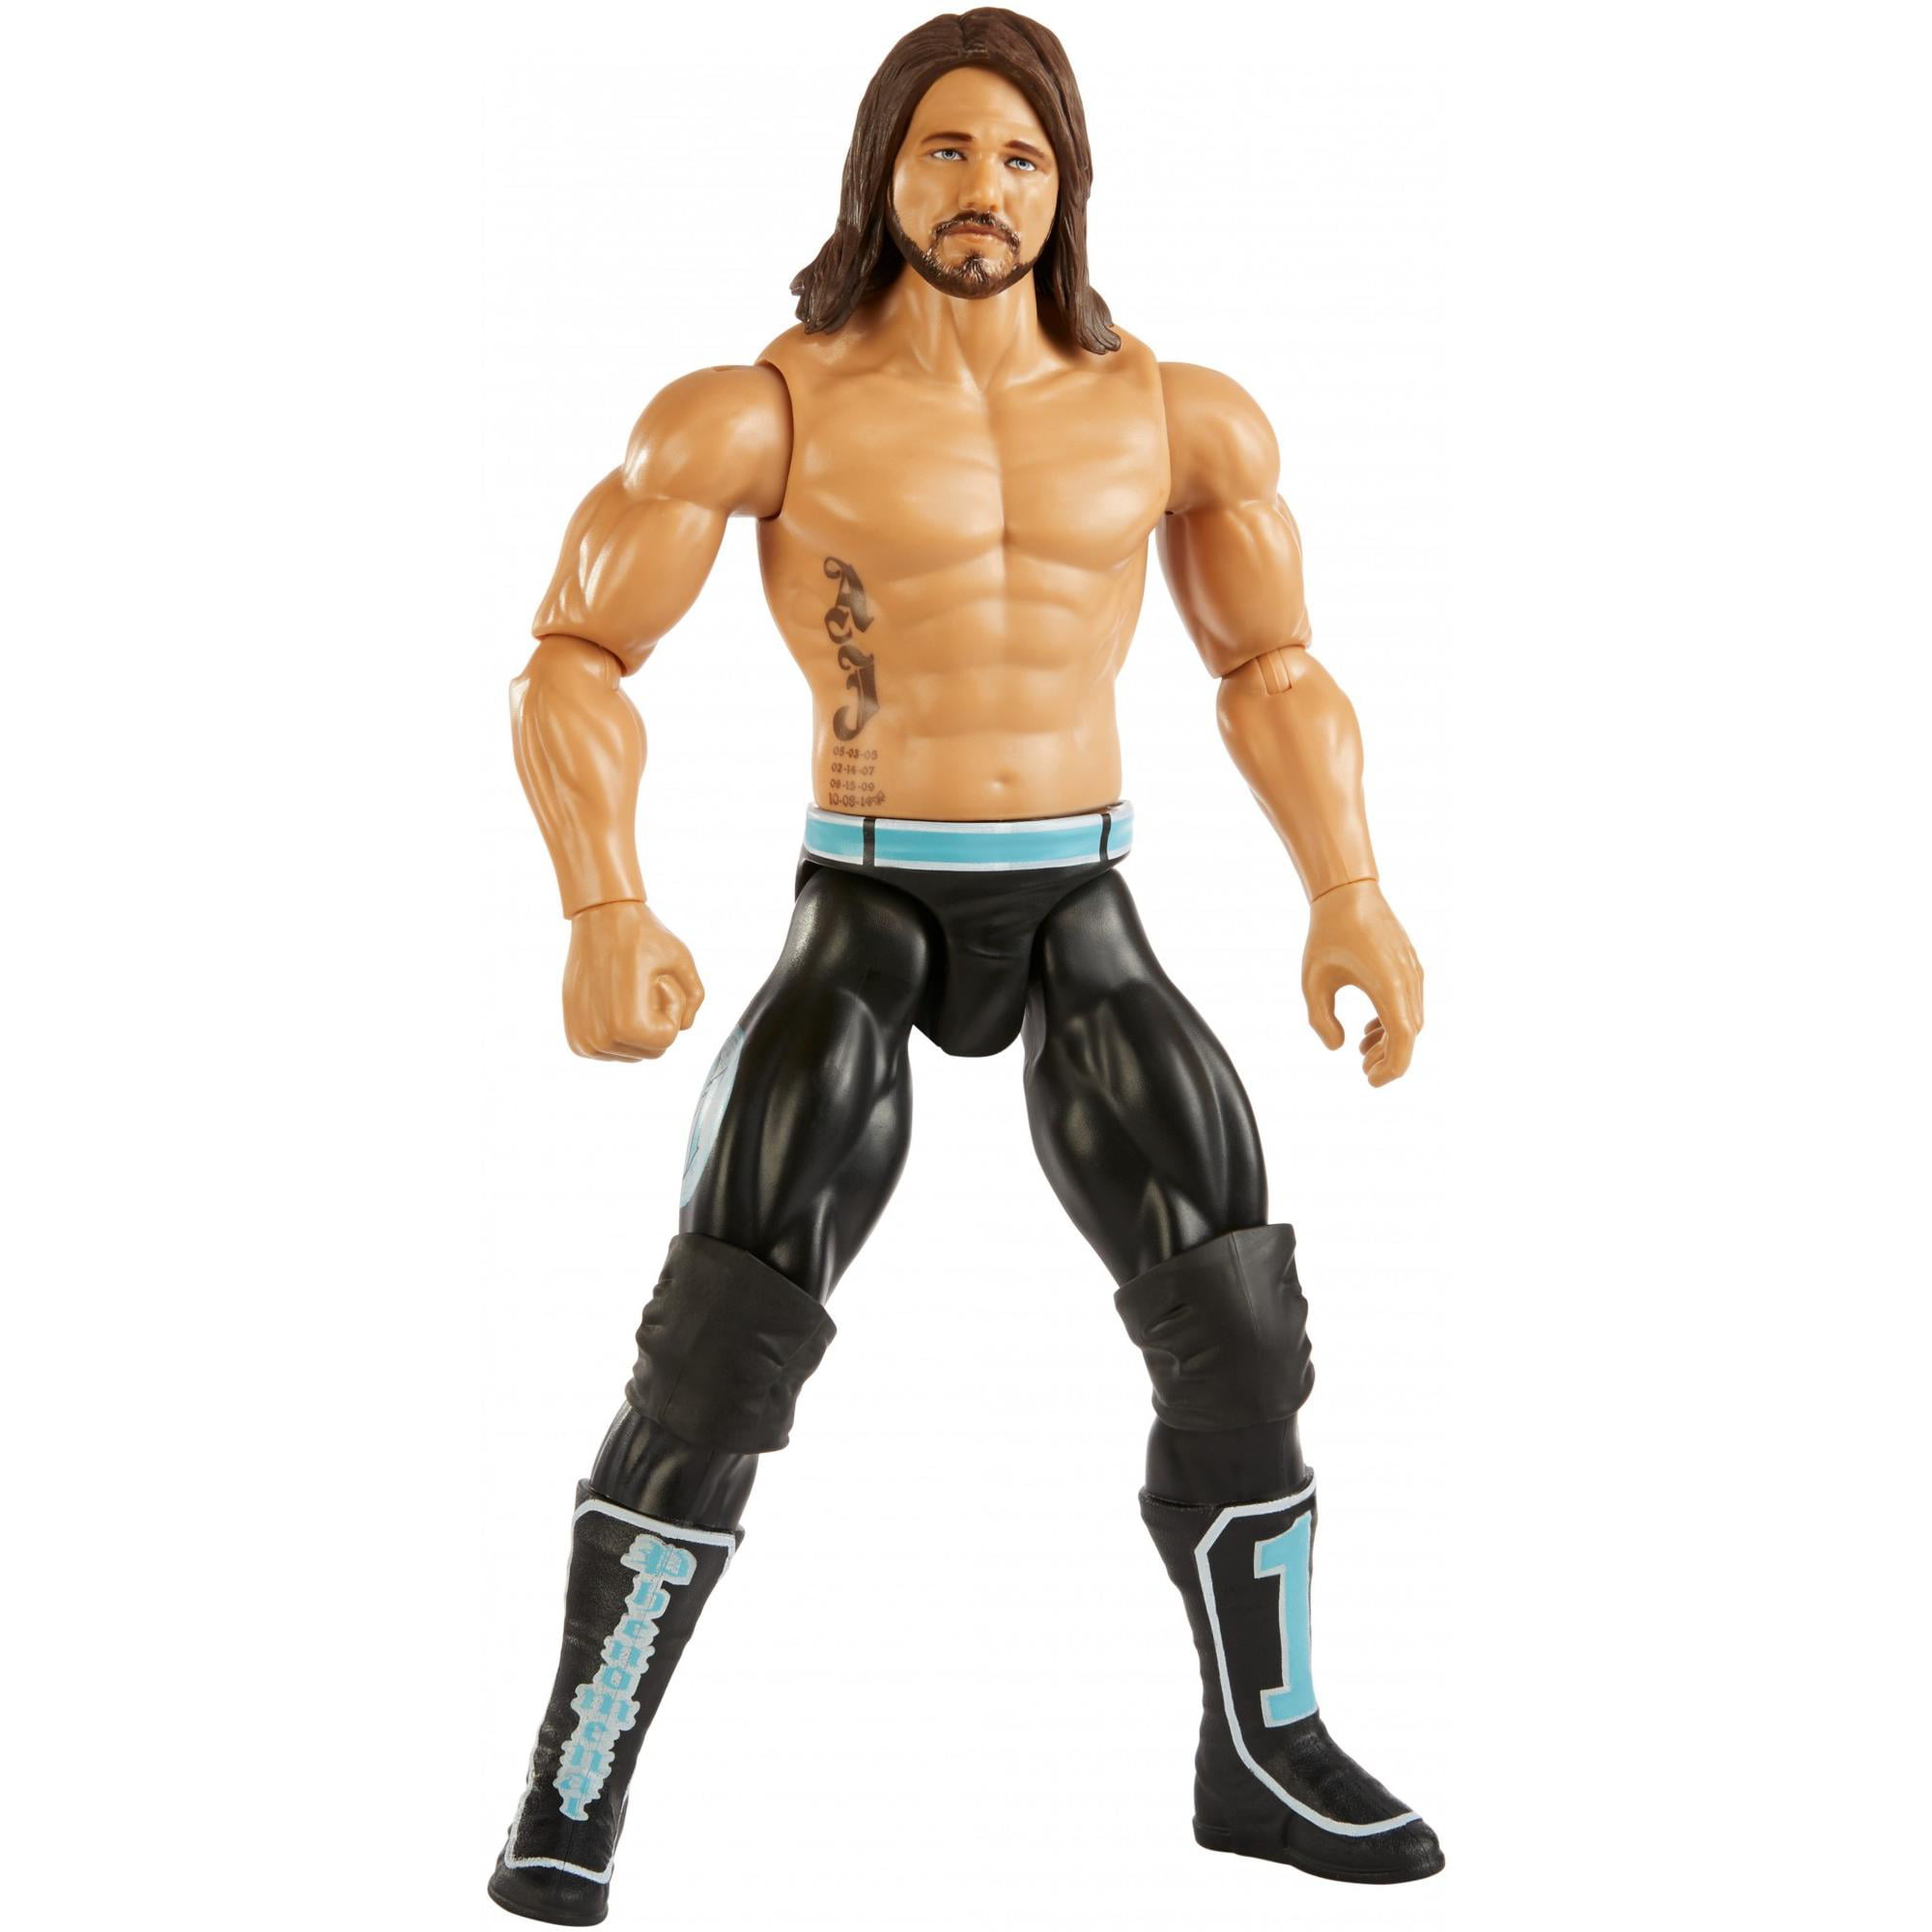 12 inch wwe action figures